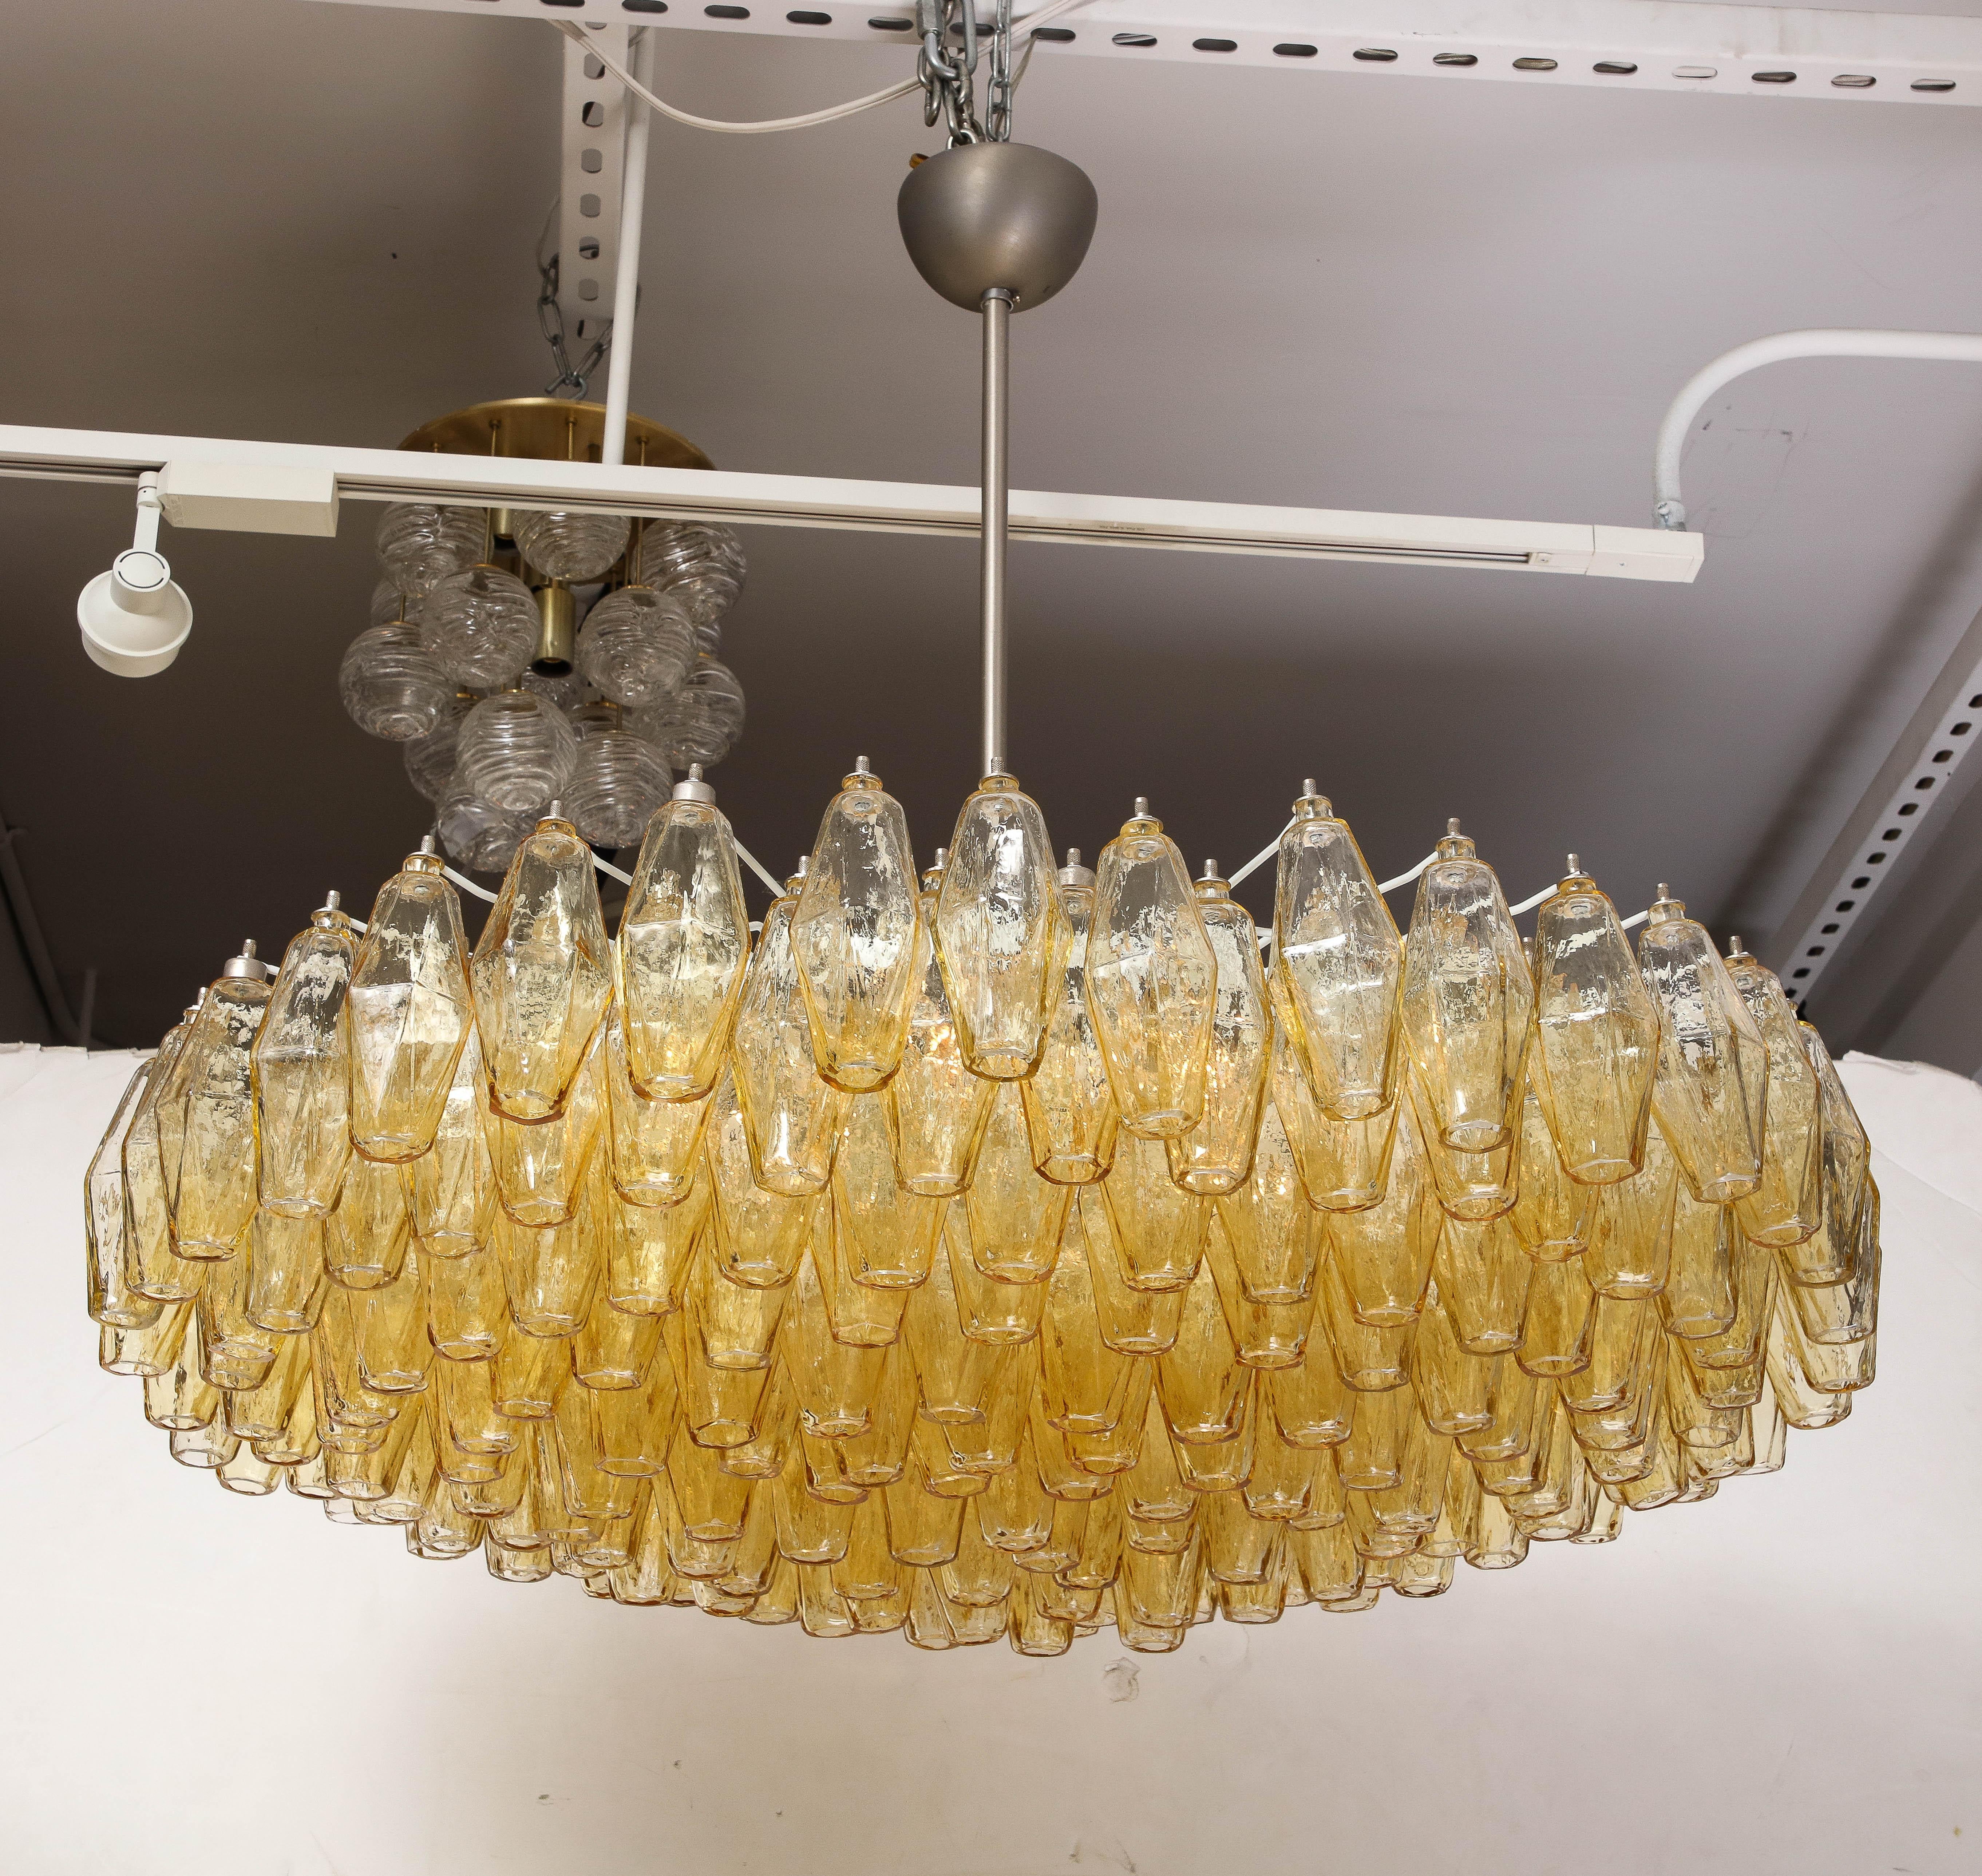 Modernist chandelier featuring multiple rows of blown glass polyhedral elements in champagne/amber/honey color suspended from a white enamel frame and satin nicklel canopy. UL listed wiring. Takes 6 edison style sockets. Carlo Scarpa for Venini